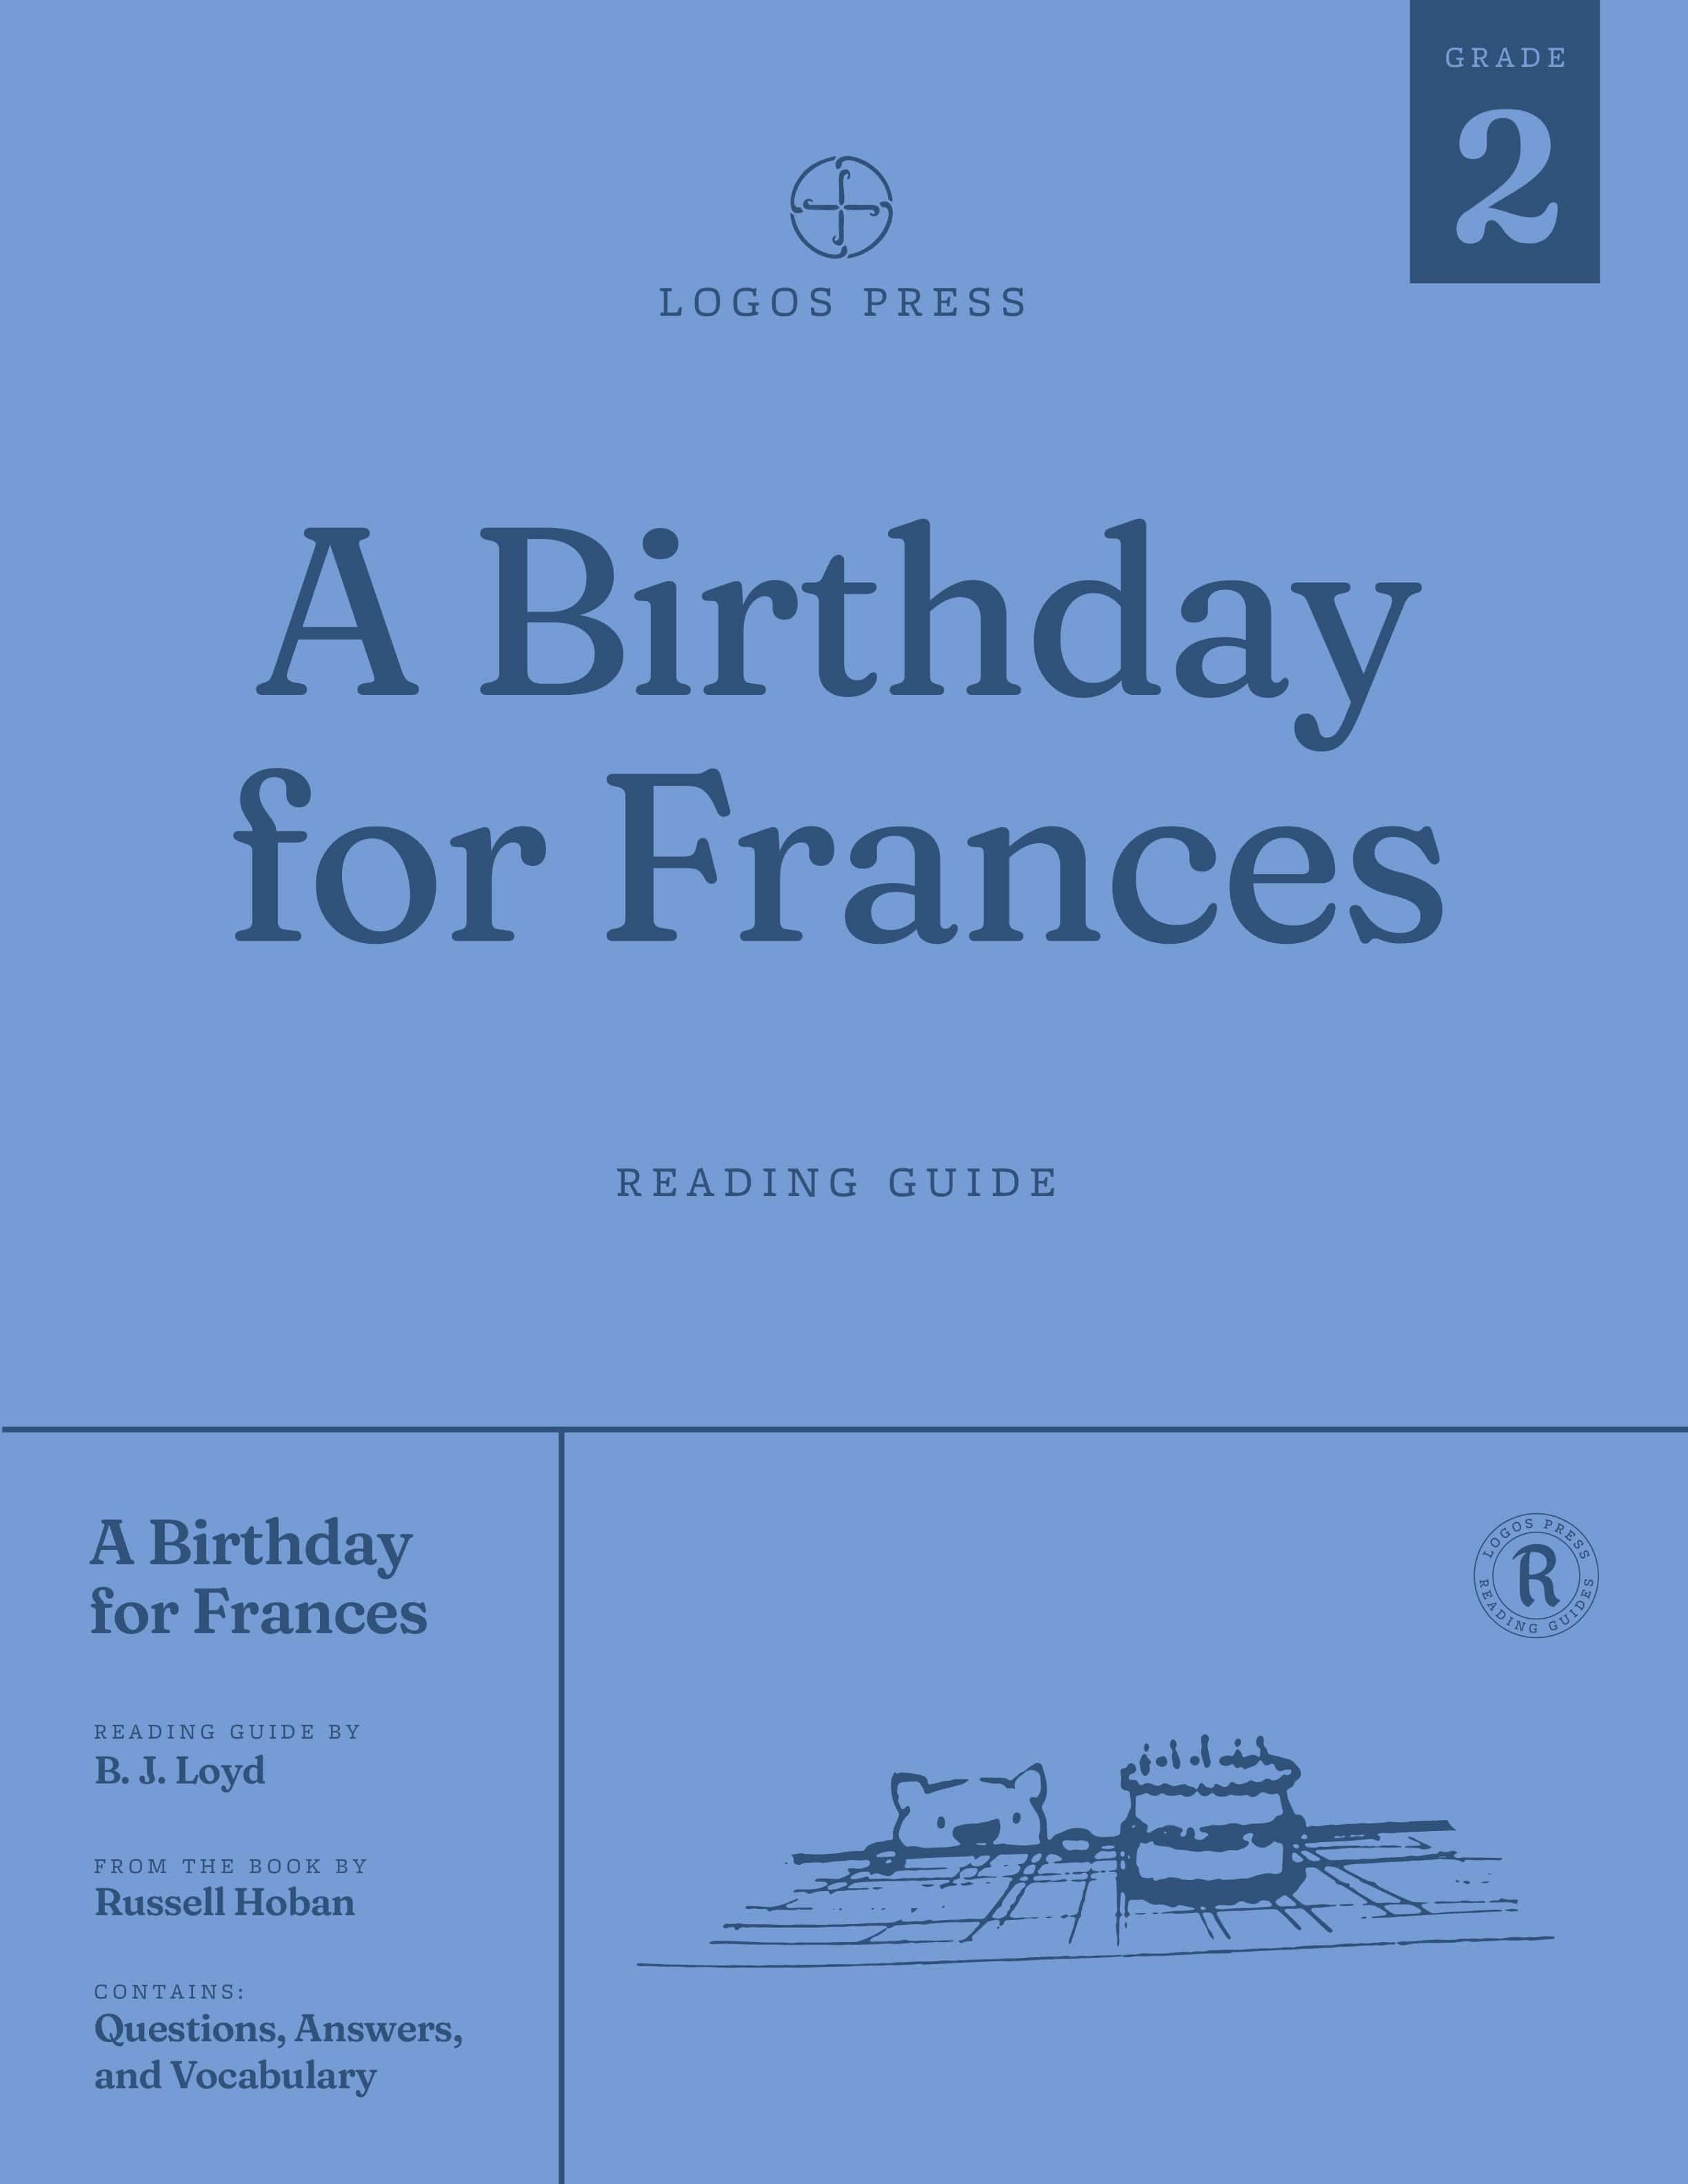 A Birthday for Frances - Reading Guide (Download)